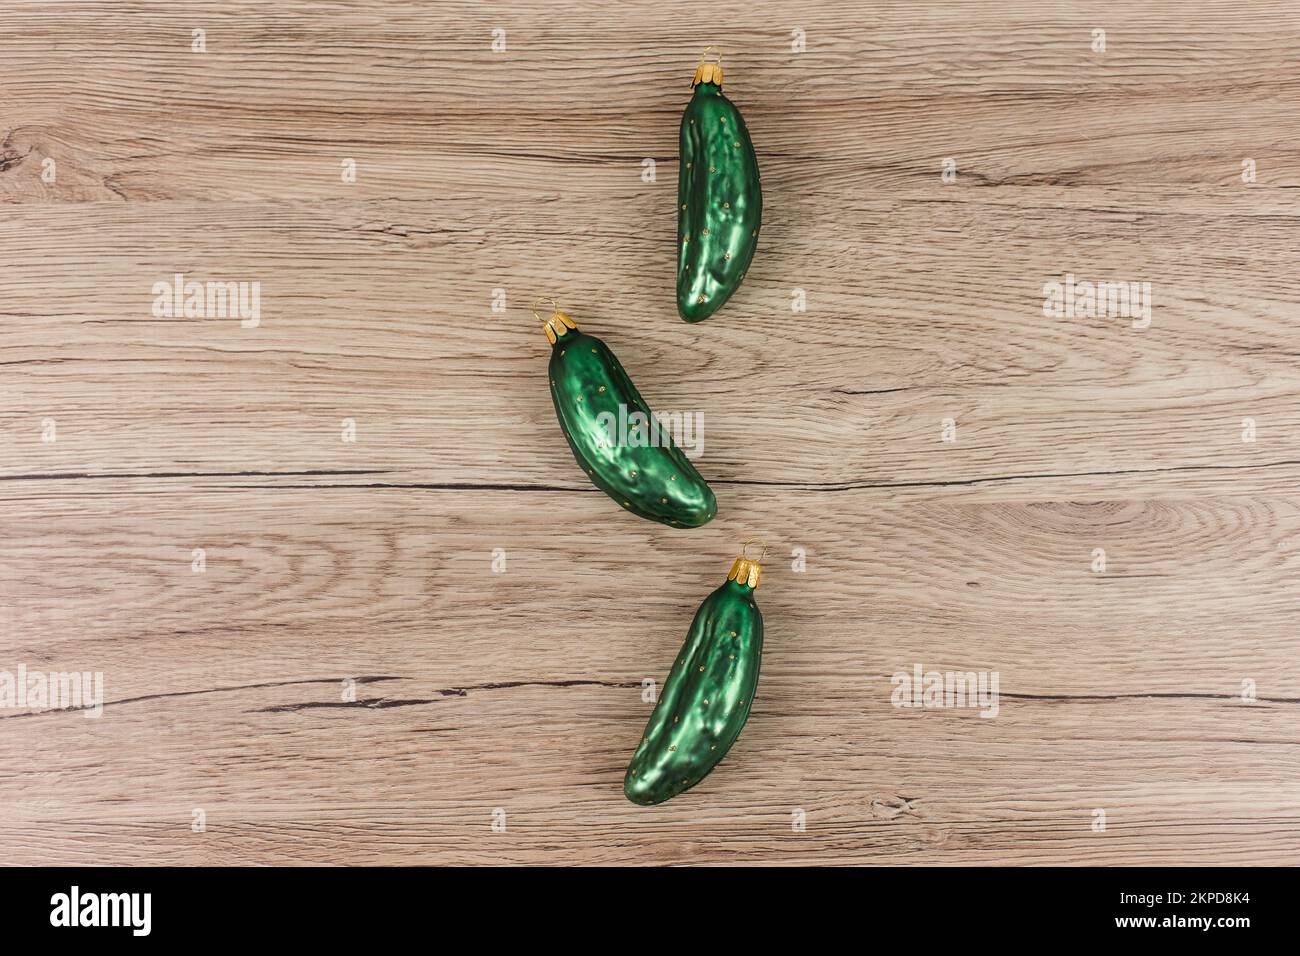 Three Christmas tree baubles in the shape of a cucumber are lying on a wooden background. Stock Photo